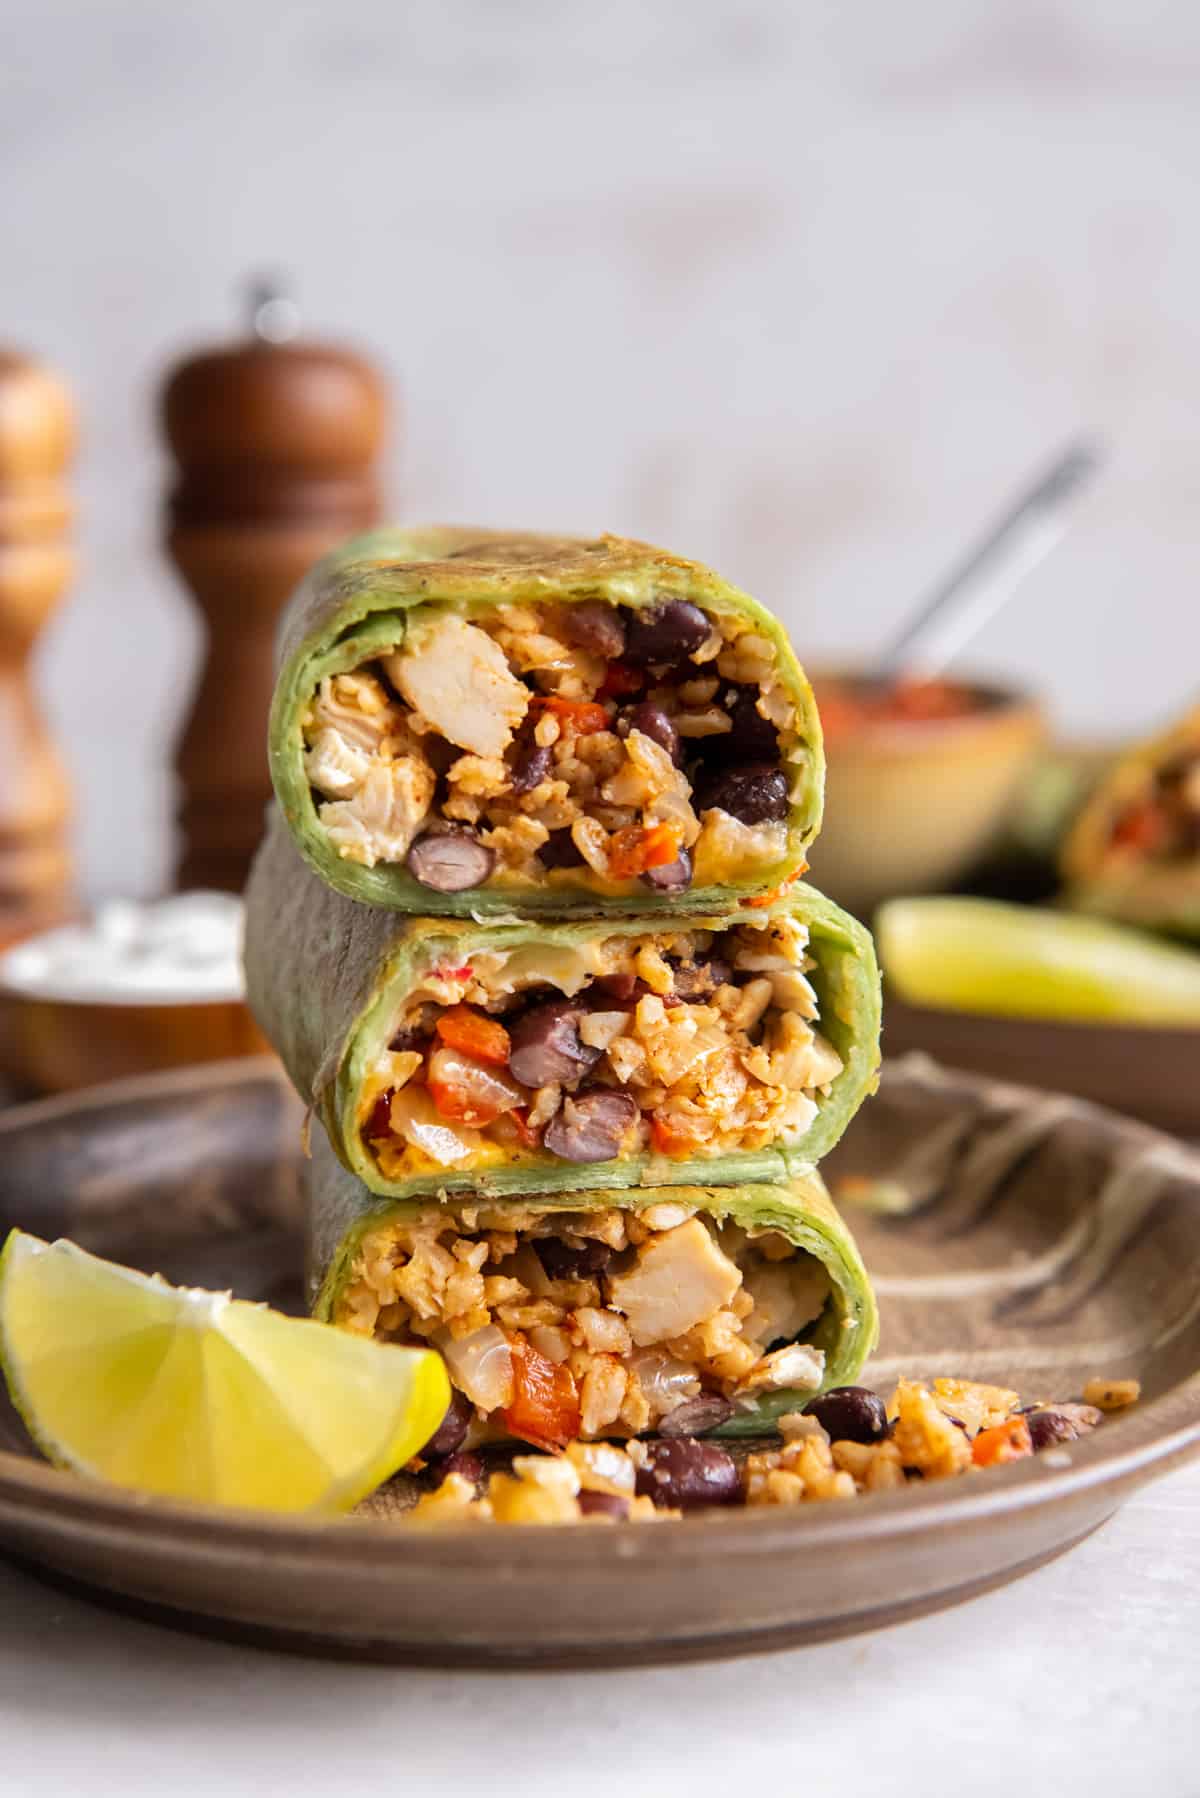 A stack of halved burritos in green tortillas revealing the filling of rice, black beans, red bell peppers, and chicken.